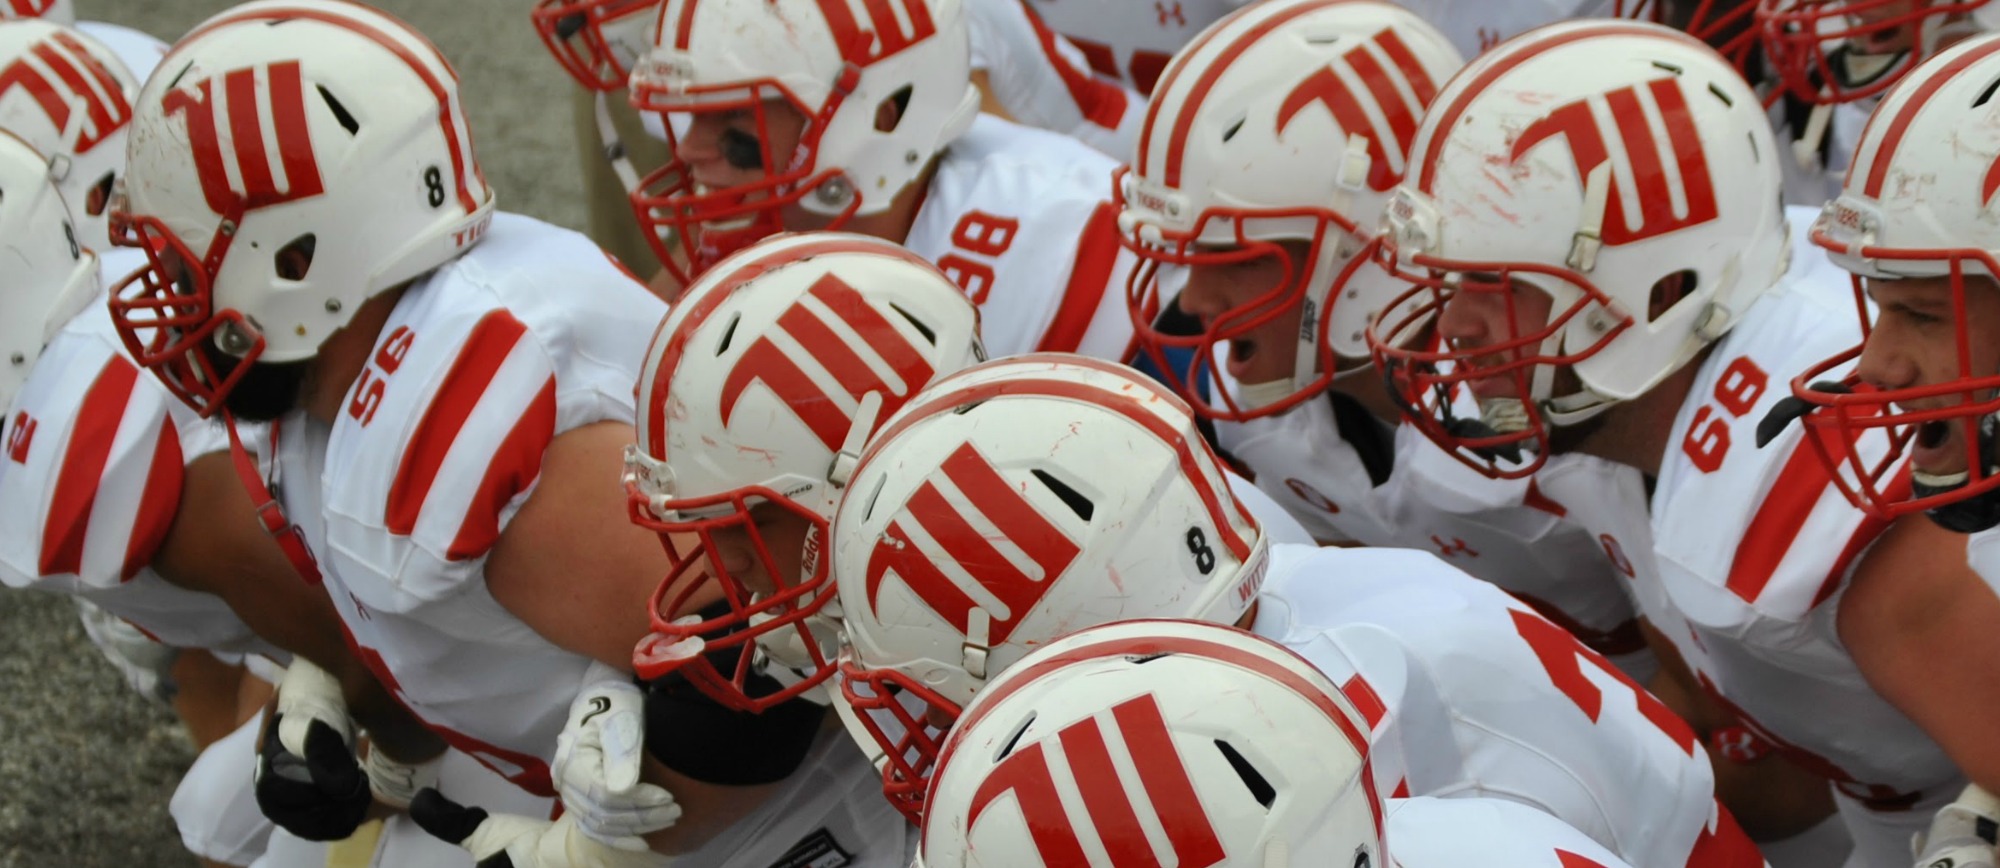 #14 Wittenberg Falls to Denison 24-21 on Late Field Goal